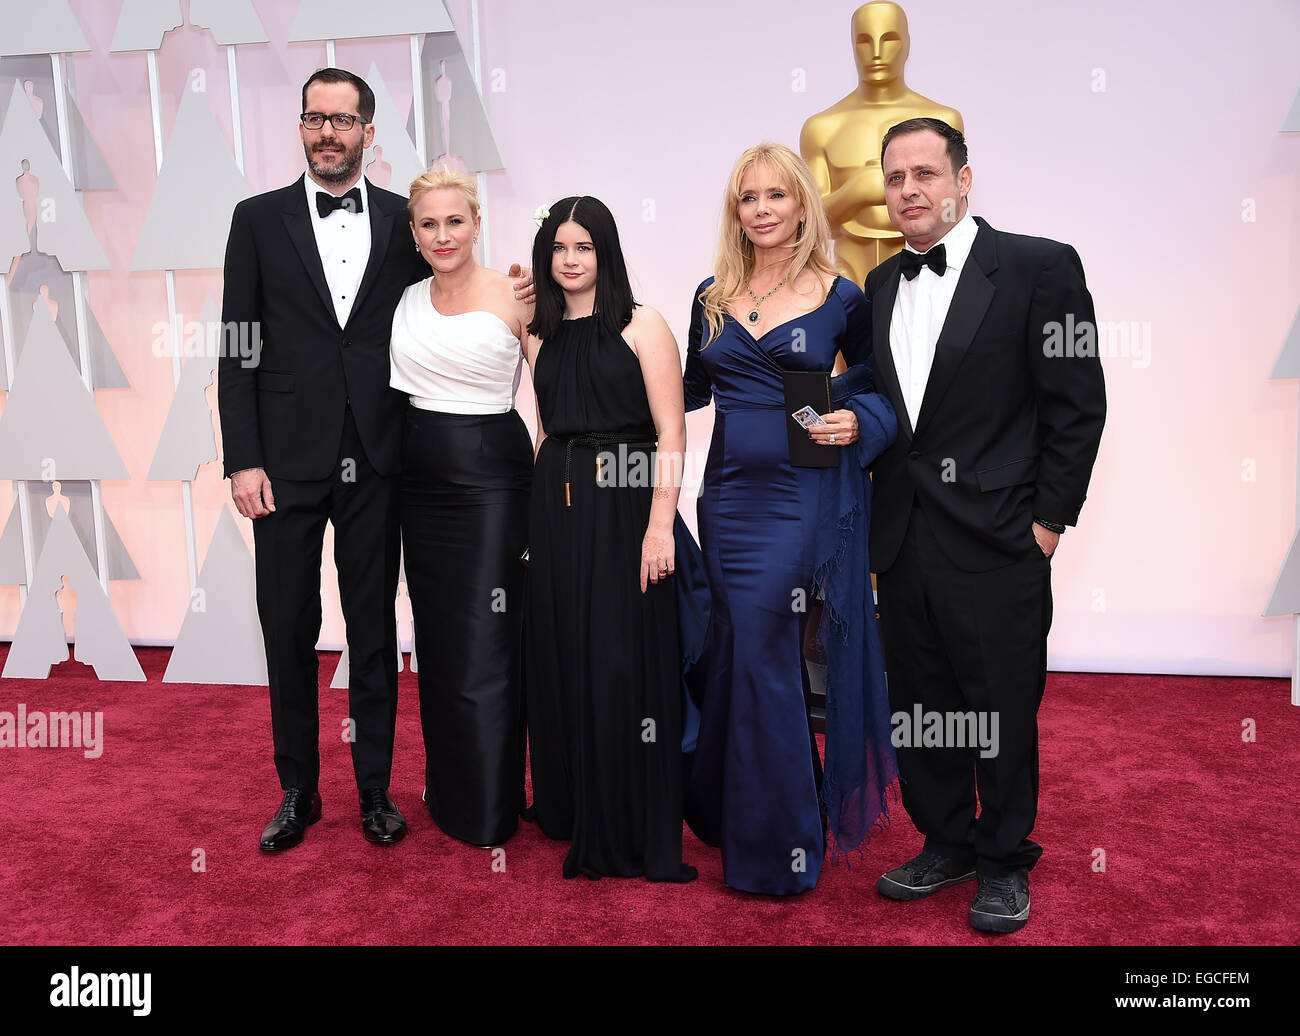 Hollywood, California, USA. 22nd Feb, 2015. Sisters PATRICIA ARQUETTE and ROSANNA ARQUETTE arriving at the 87th Academy Awards held at the Dolby Theatre in Hollywood, Los Angeles, CA, USA Credit:  Lisa O'Connor/ZUMA Wire/ZUMAPRESS.com/Alamy Live News Stock Photo